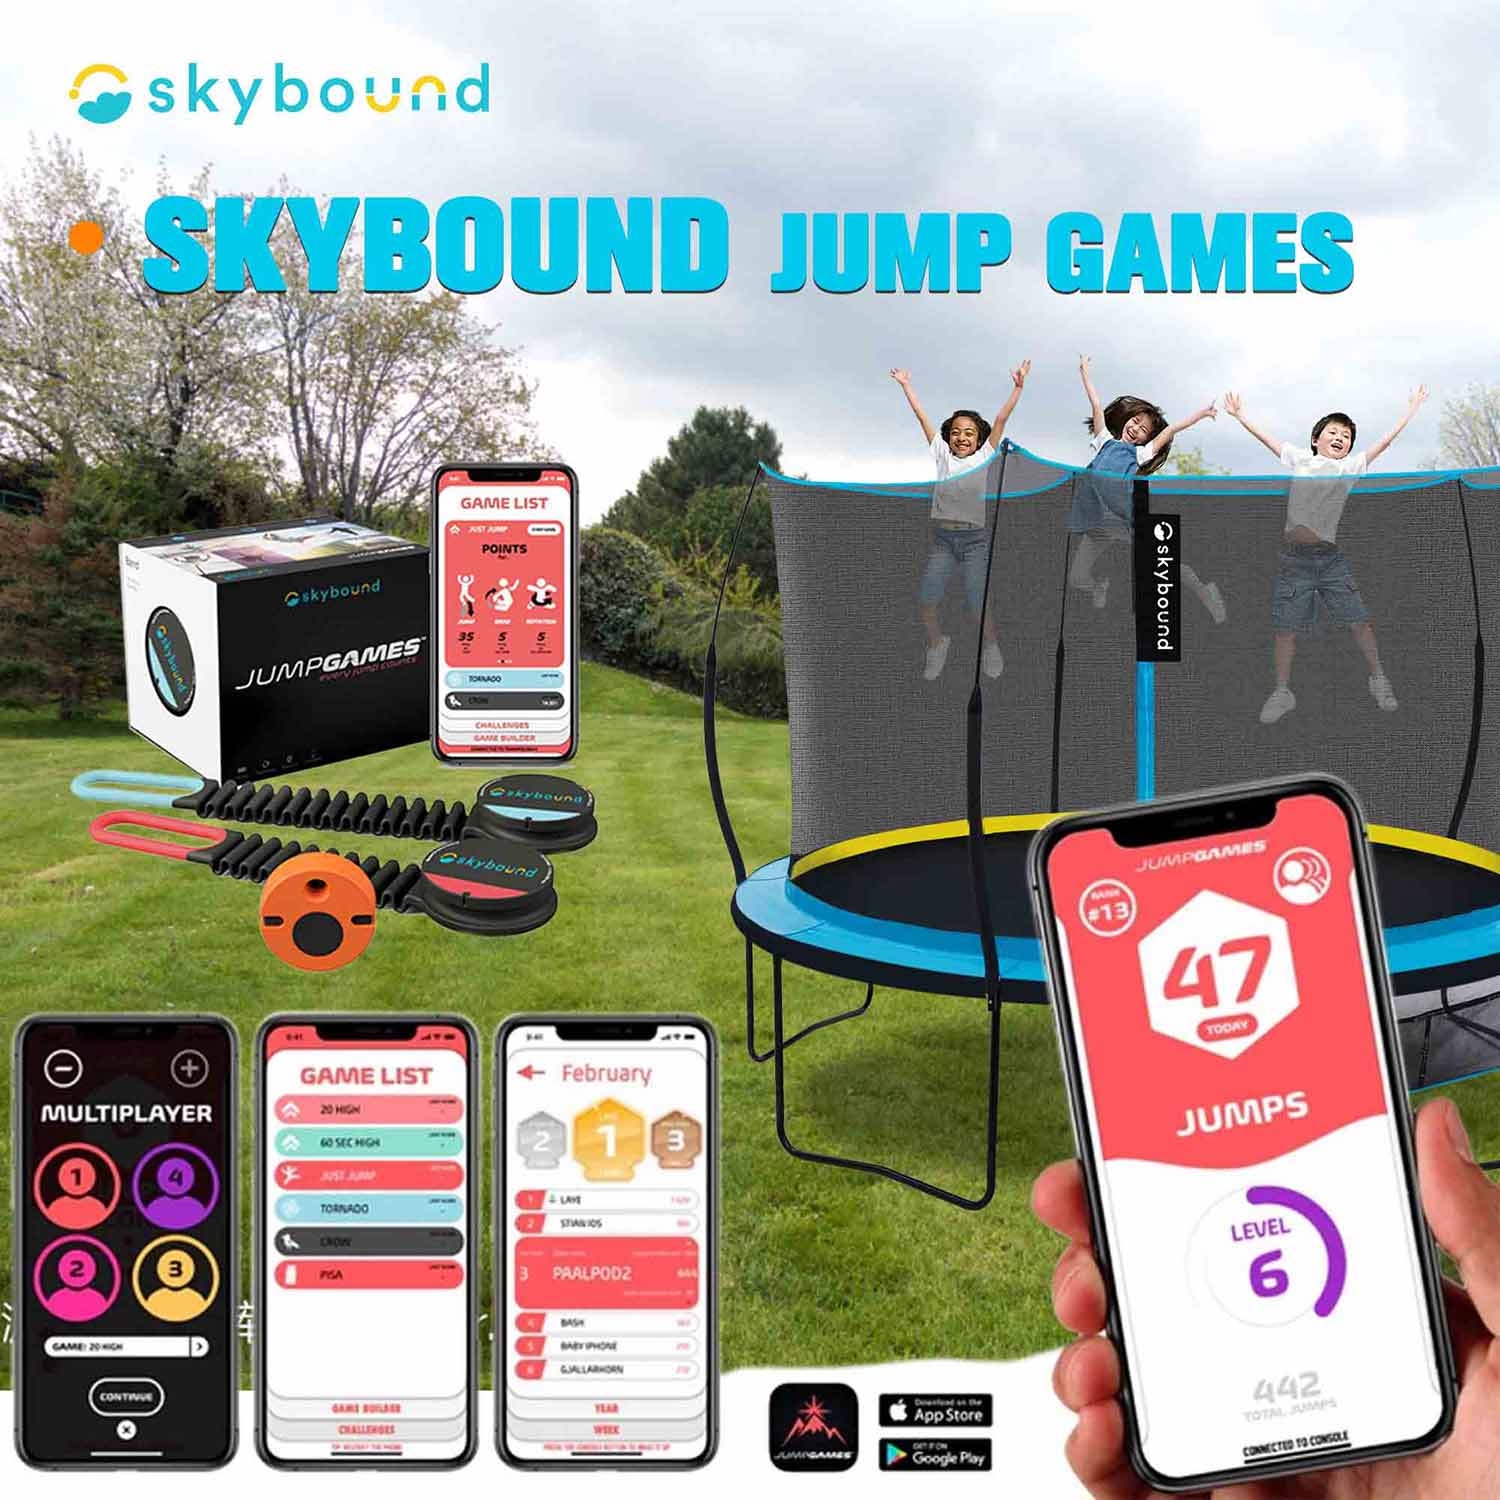 Title: SKYBOUND JUMP GAMES Description: On the left, there is an electronic wristband provided with the Skylift trampoline. On the right, three children are jumping on a Skylift 8-foot trampoline. Below, there are four smartphone screens displaying the interface of the Skylift Jump Games app, along with icons supporting downloads for Android and Apple phones.